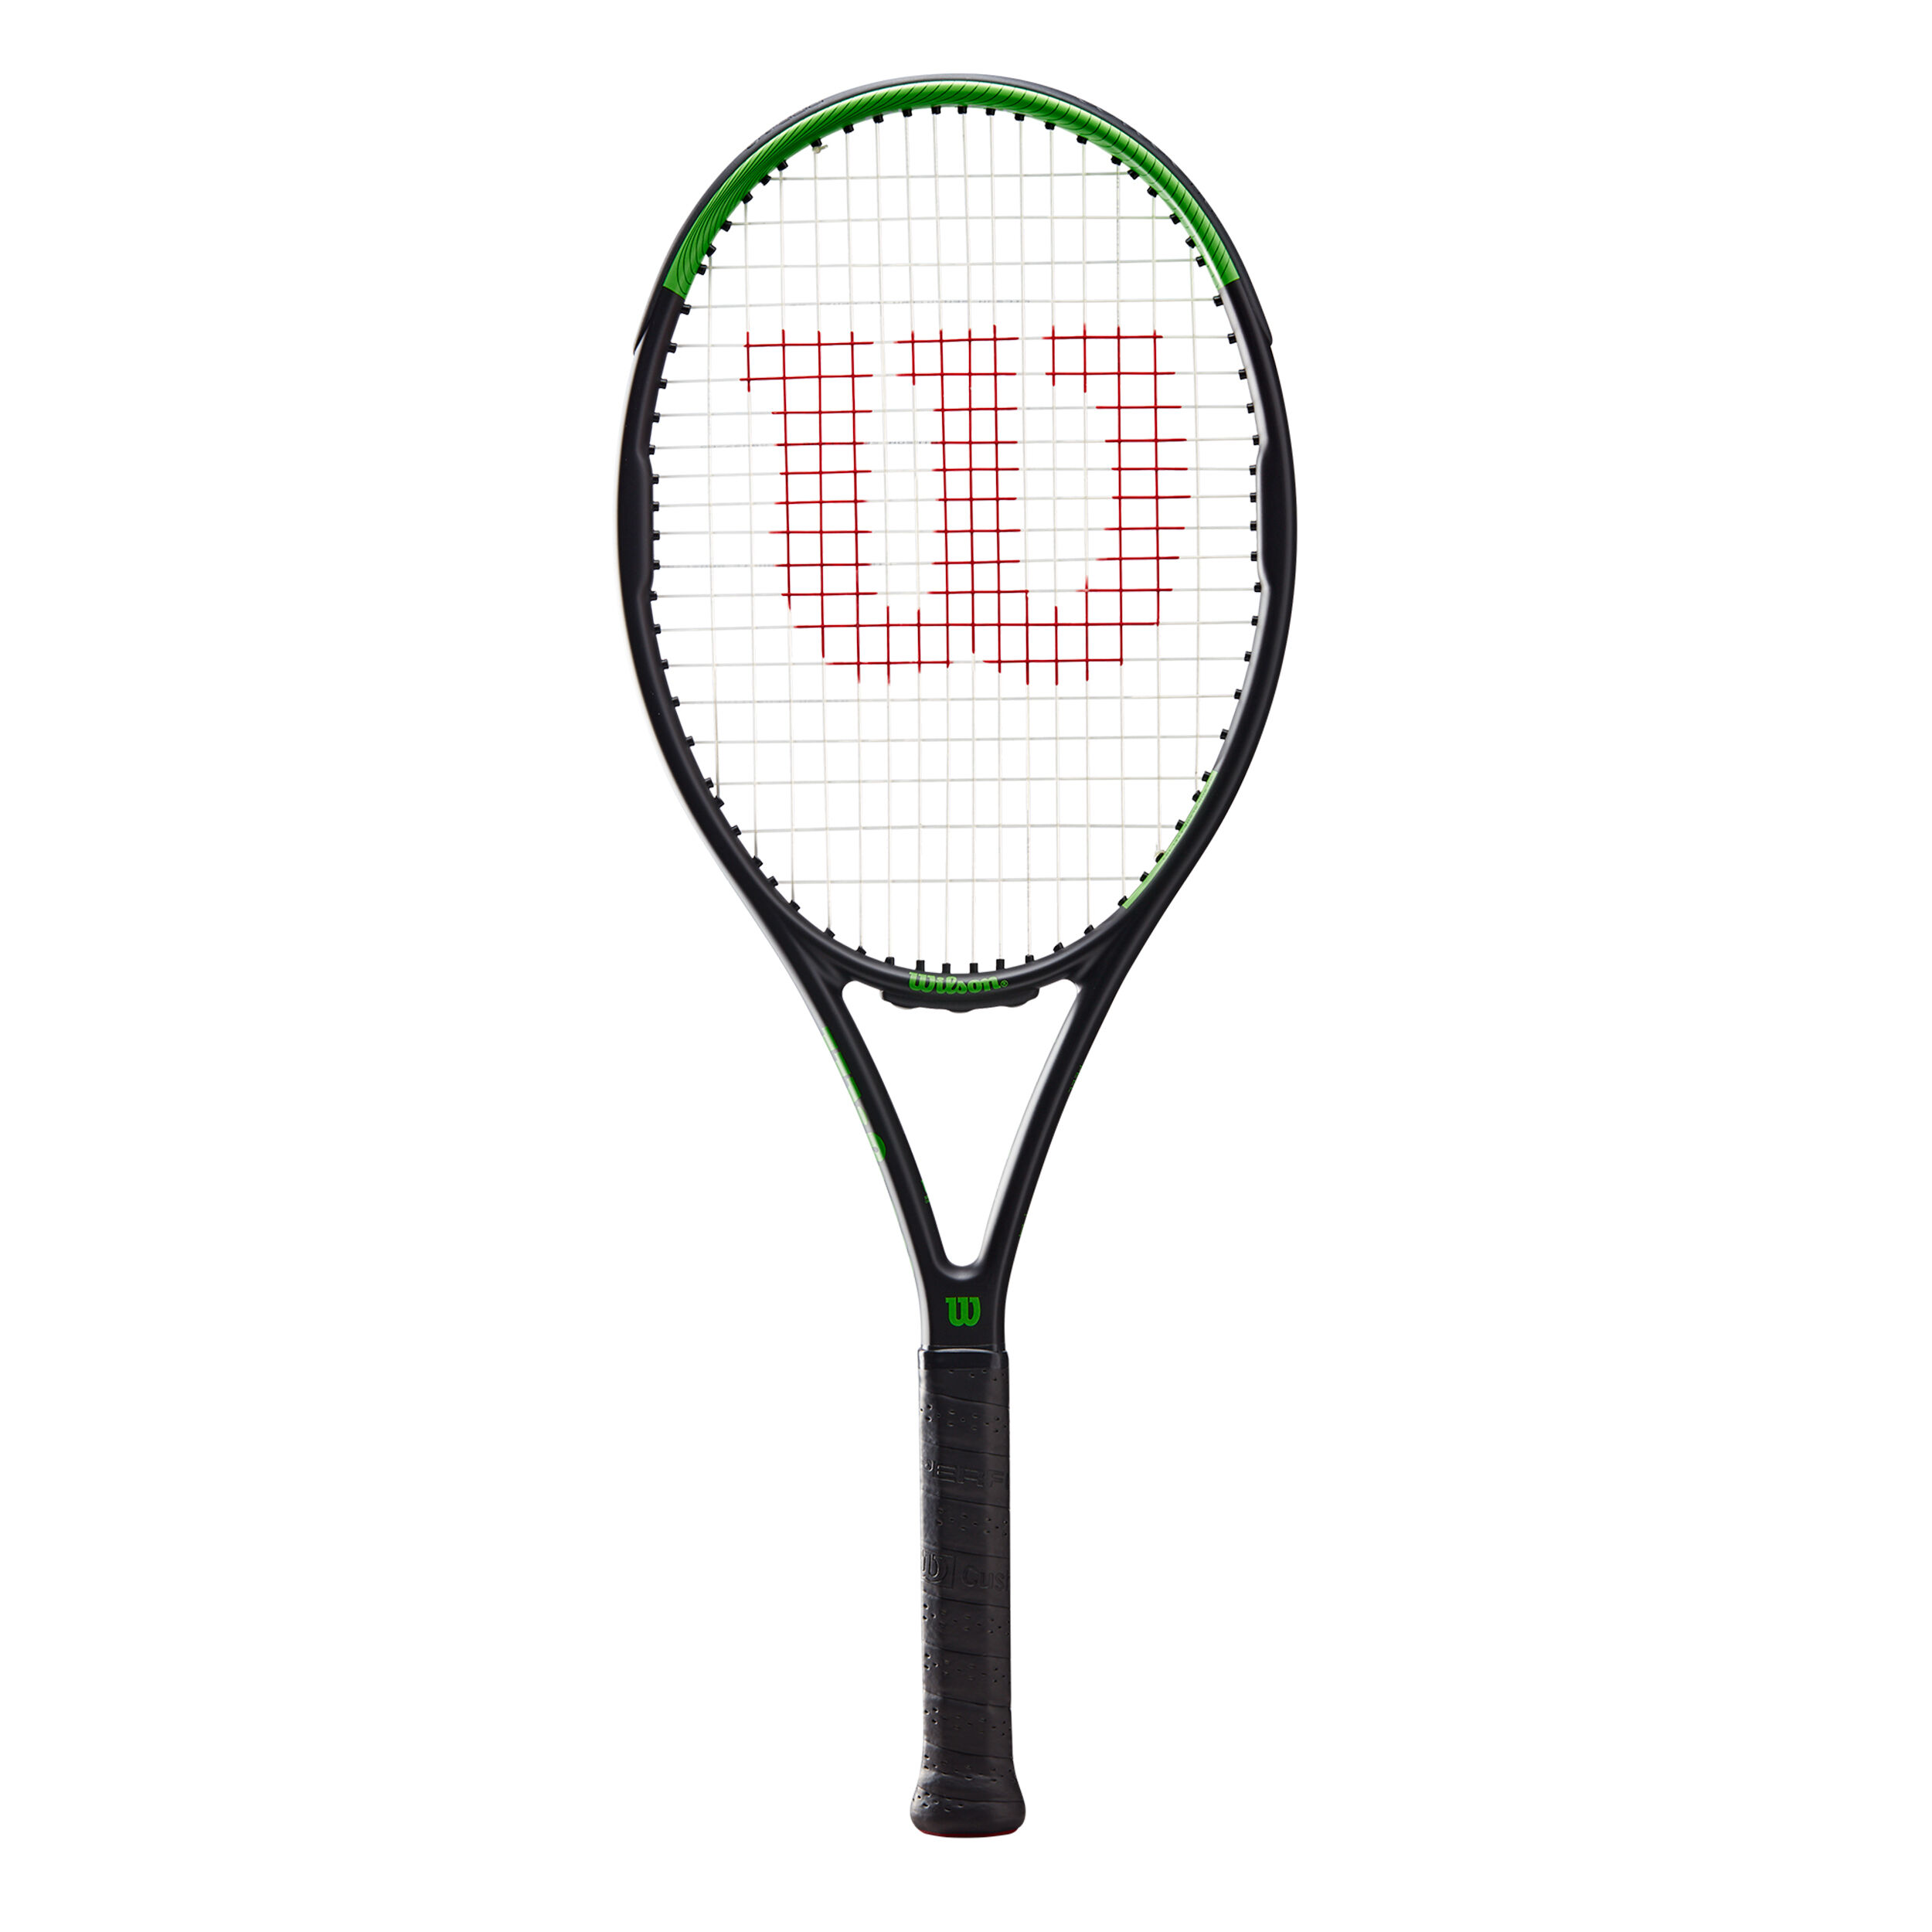 Babolat C-Drive 105 Tennis Racket RRP £199 CLEARANCE SPECIAL 